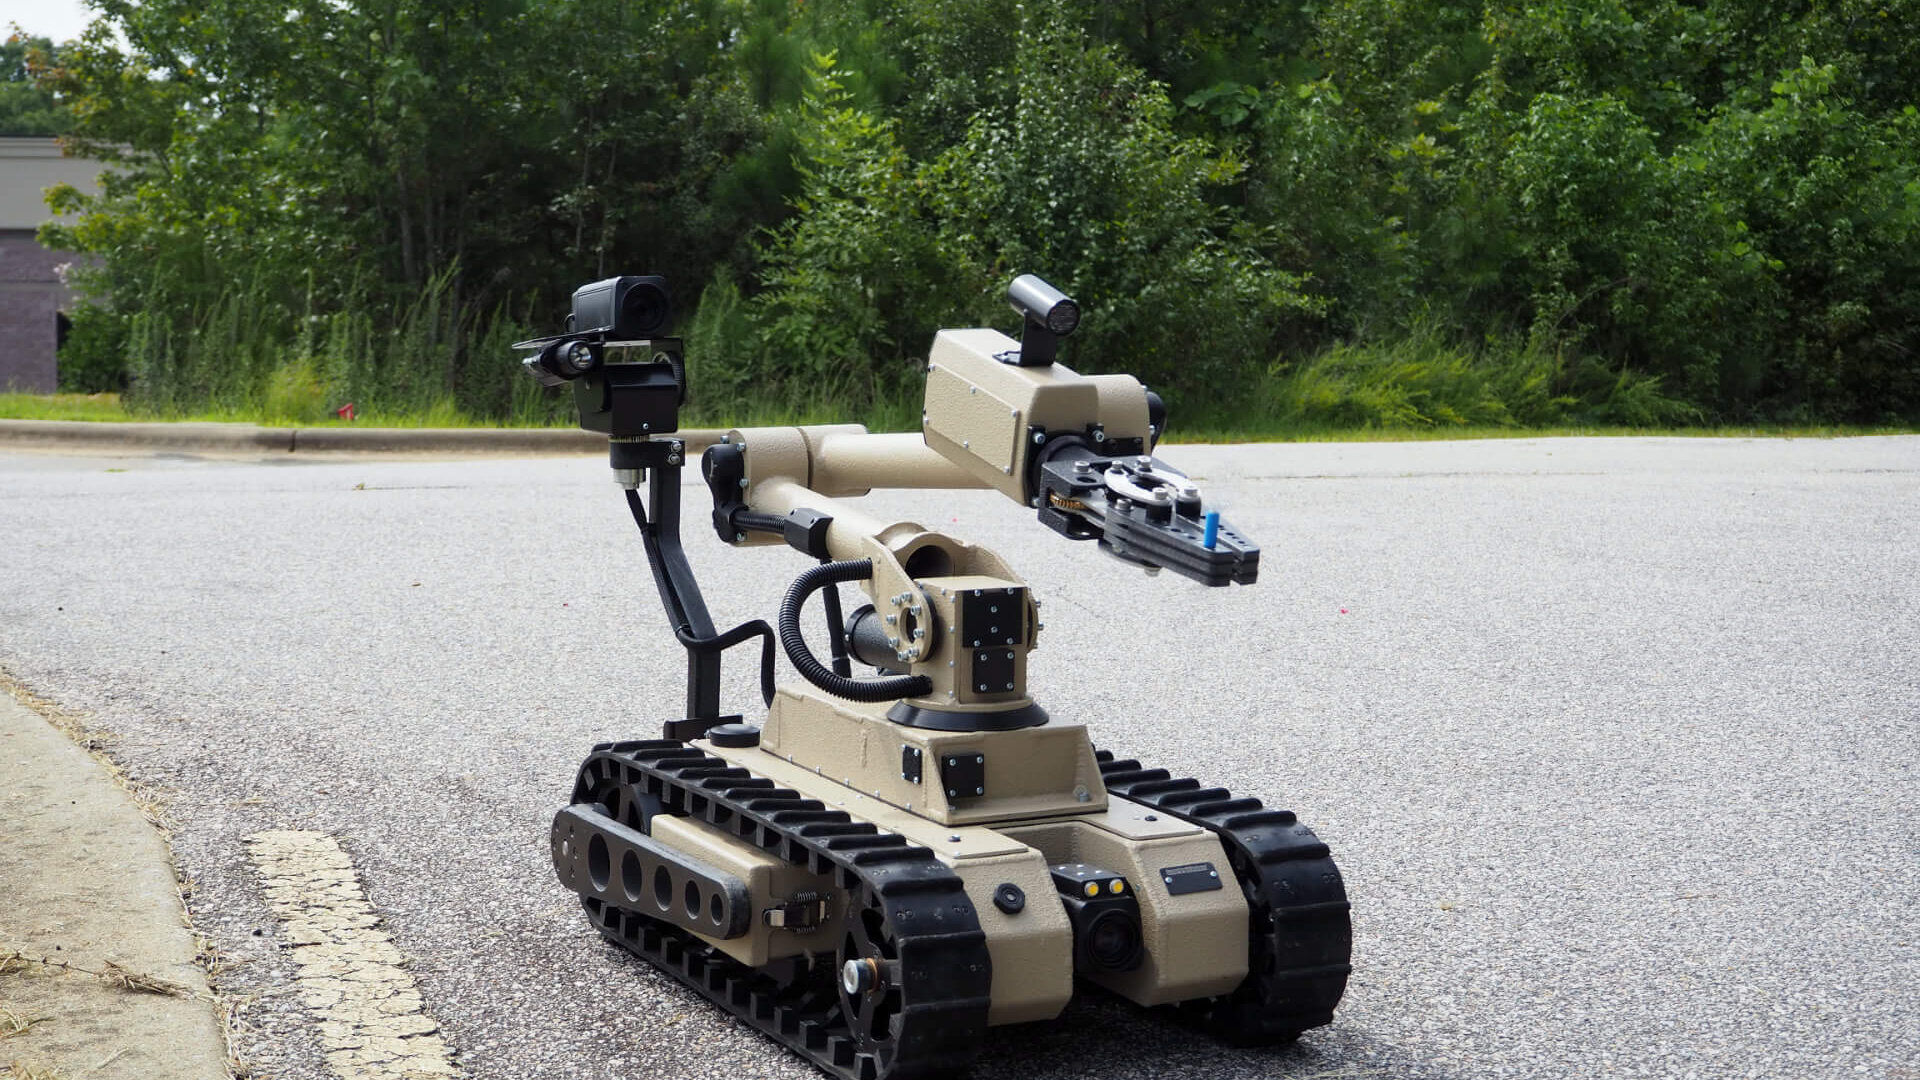 Tactical Robot in the road